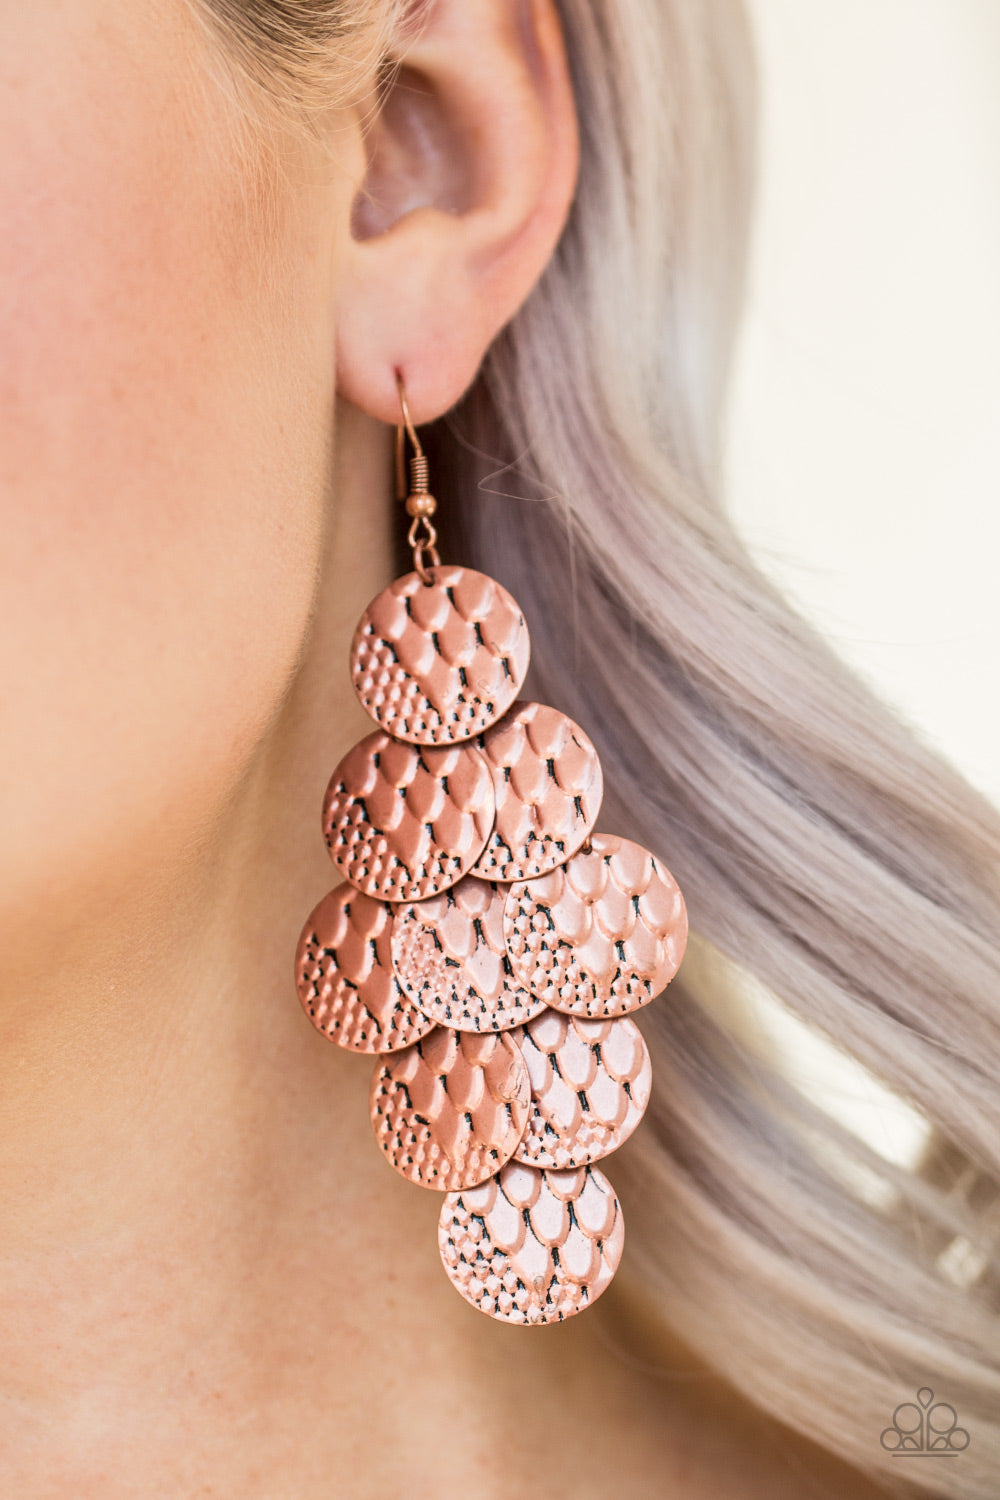 Paparazzi The Party Animal - Copper - Rippling Antiqued Textures - Earrings - $5 Jewelry with Ashley Swint